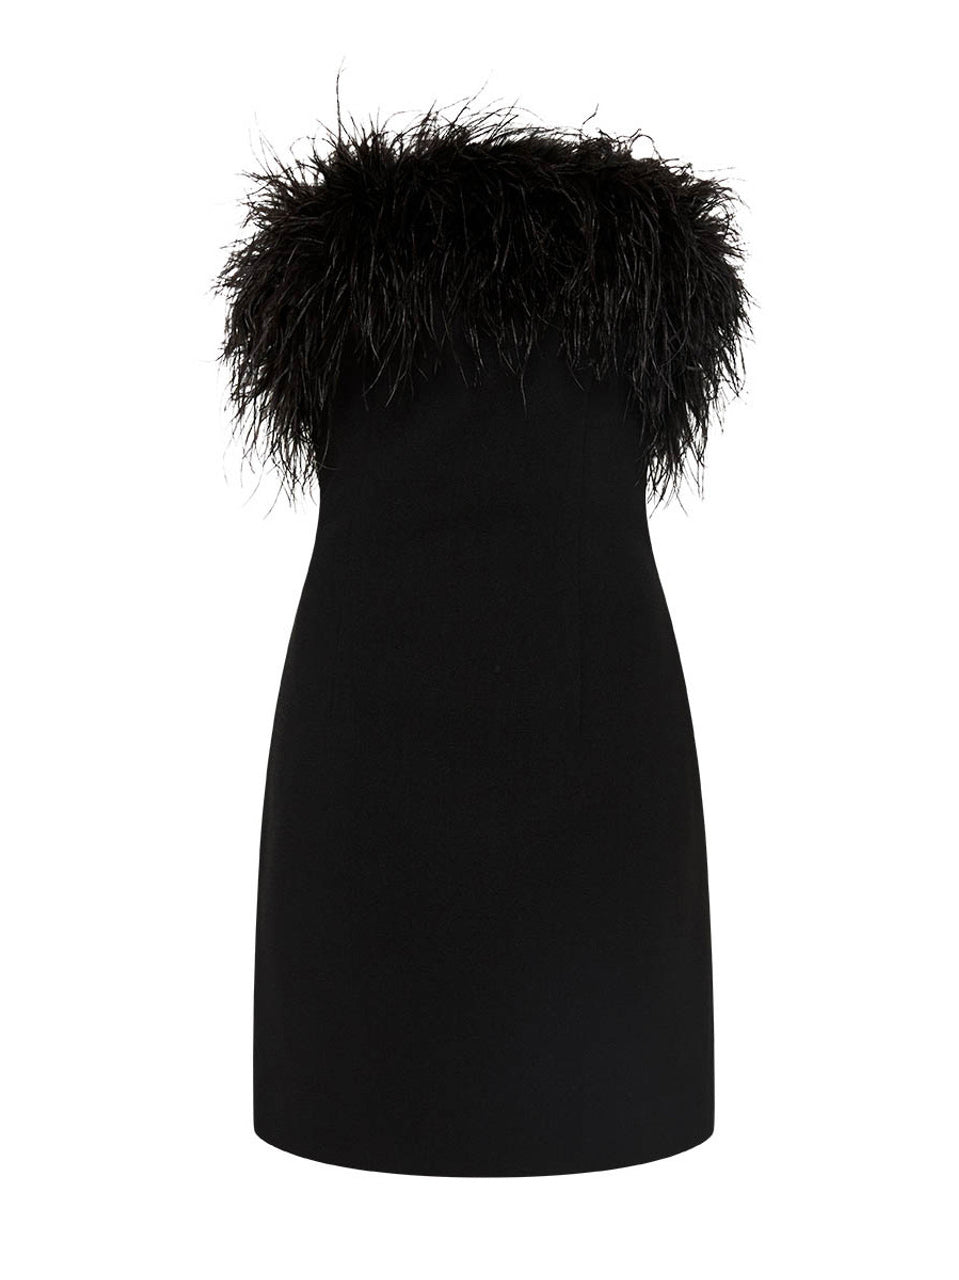 AFTER HOURS FEATHER MINI dress, BLACK